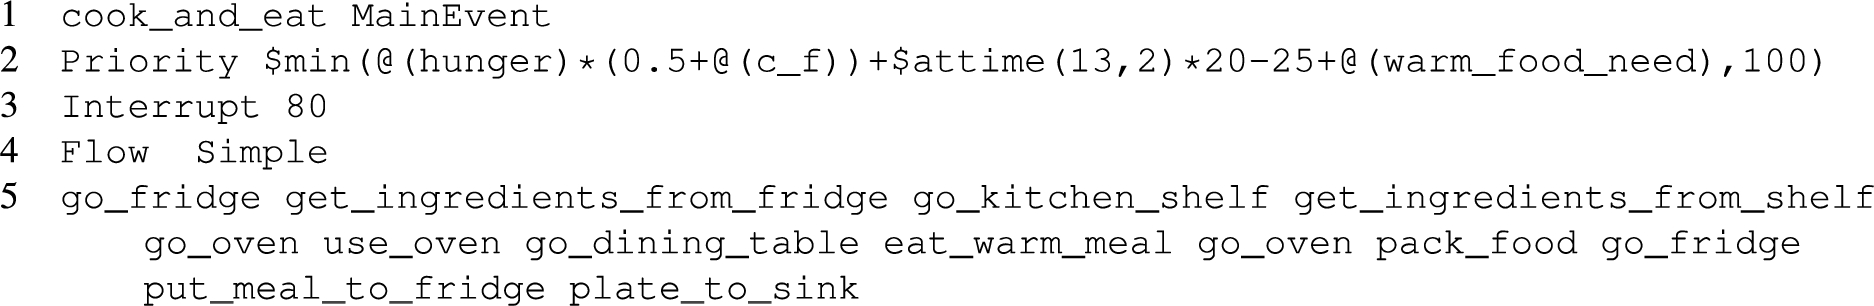 Example of main event describing the activity cook_and_eat. This activity is composed by a list of actions, also called bottom events. The priority of the event (see row 2) is provided by a formula taking into account the fact of being in a particular moment of the day (through the $attime built-in formula), the necessities (through the human variables @(warm_food_need) and @(hunger)) and preferences of the specific inhabitant (through the human constant @(c_f)). The interrupt value (see row 3) defines the minimum priority another main event needs to interrupt this event. Finally, at row 5, the sequence of bottom events to be generated (i.e., actions to be executed by the human inhabitant to perform the activity), is reported. Among these bottom events we have movement actions (e.g., go_fridge that are automatically translated in a movement of the inhabitant to the position named fridge) and other actions, such as use_oven that are further specified.